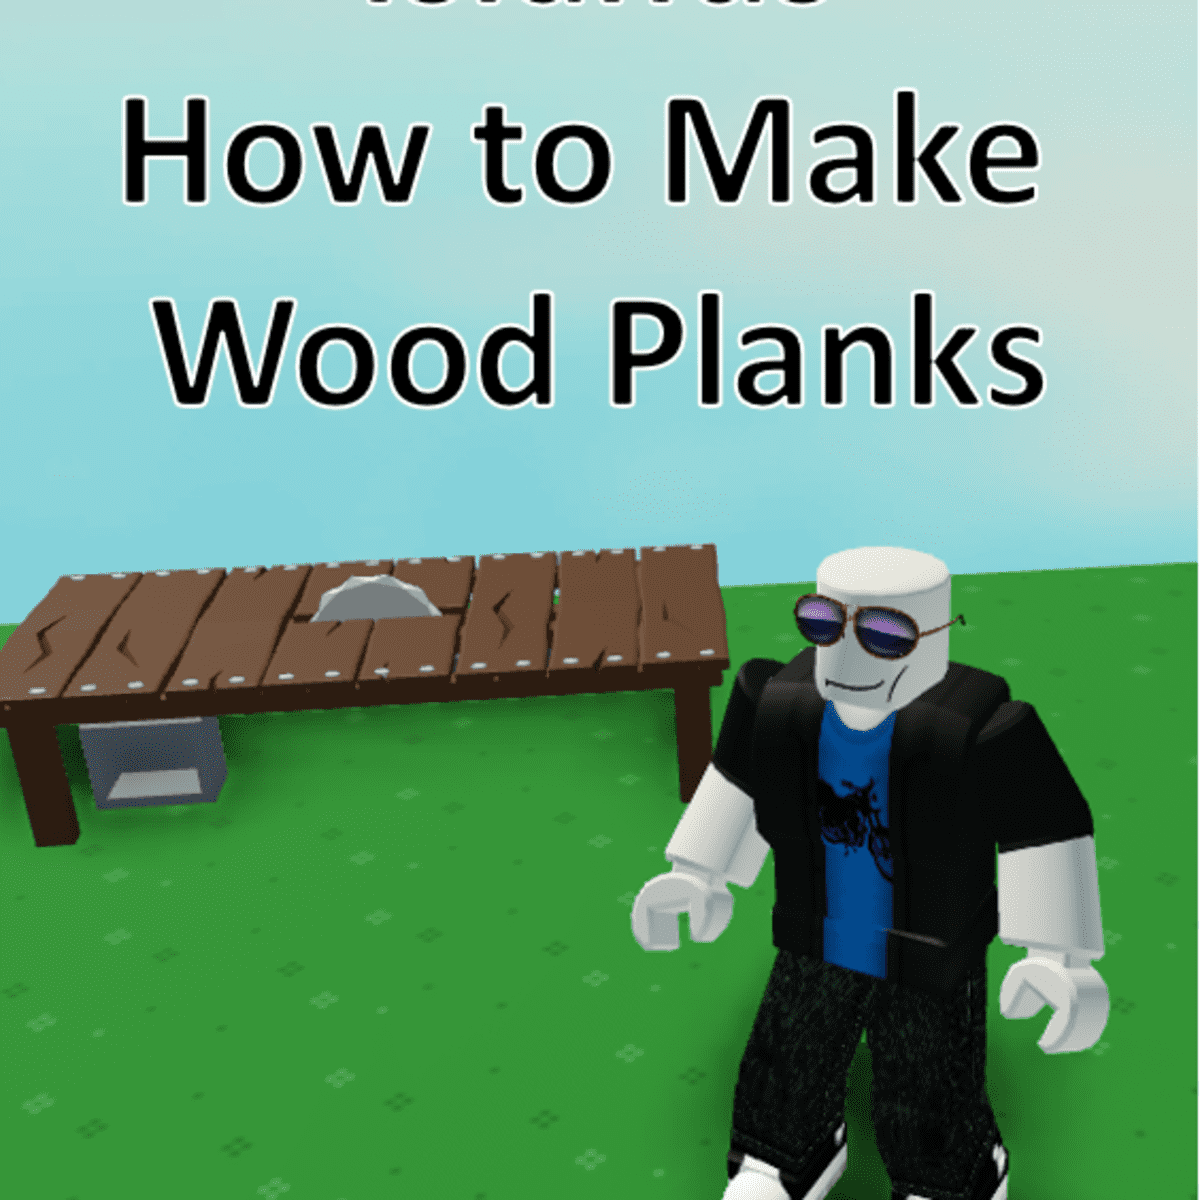 Roblox Islands How To Make Wood Planks Levelskip - how to put text on a block in roblox 2021